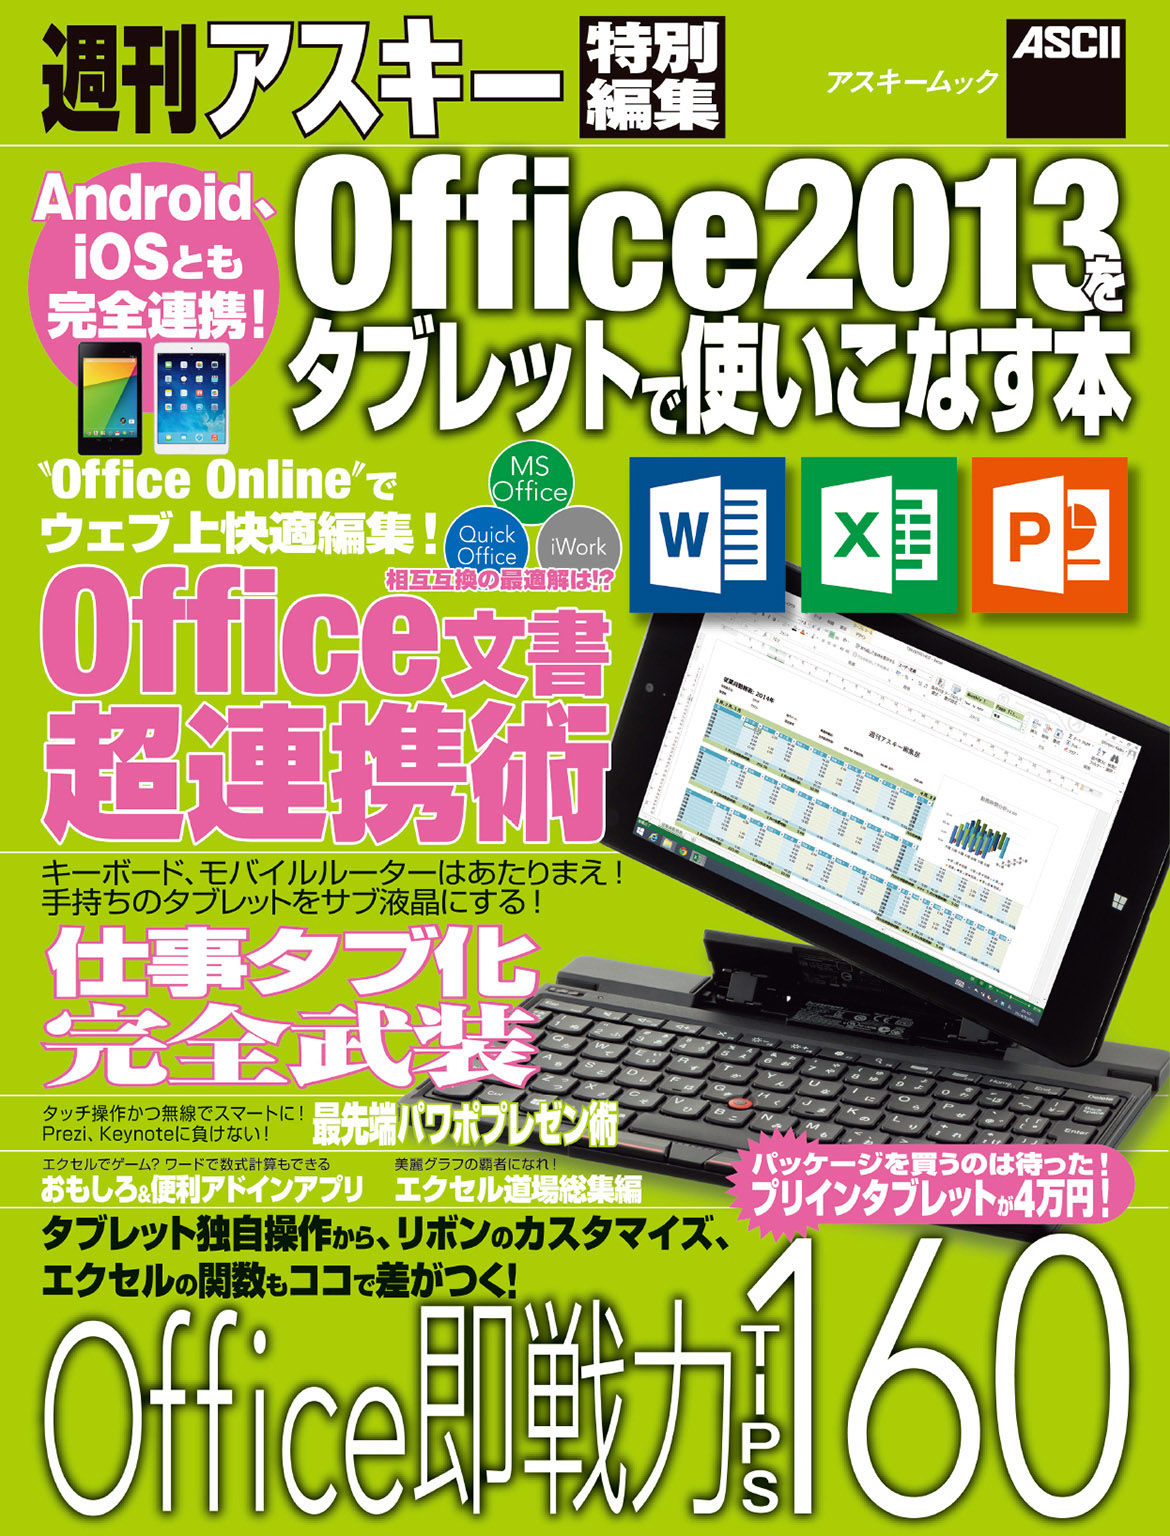 Android Iosとも完全連携 Office13をタブレットで使いこなす本 漫画 書籍を無料試し読み Epub Tw